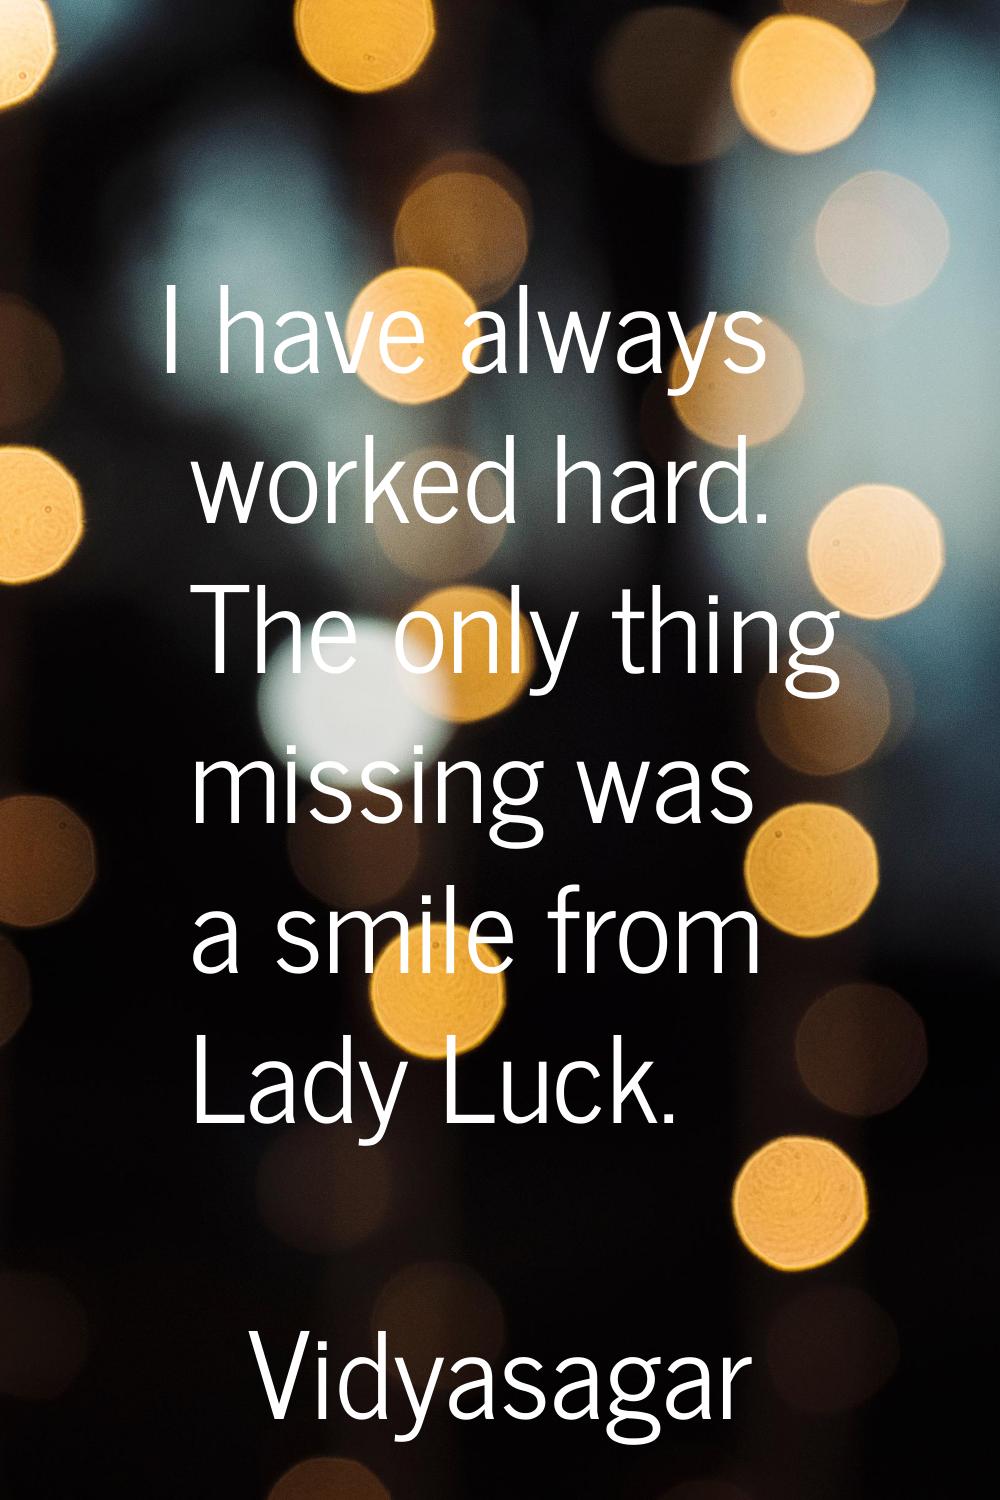 I have always worked hard. The only thing missing was a smile from Lady Luck.